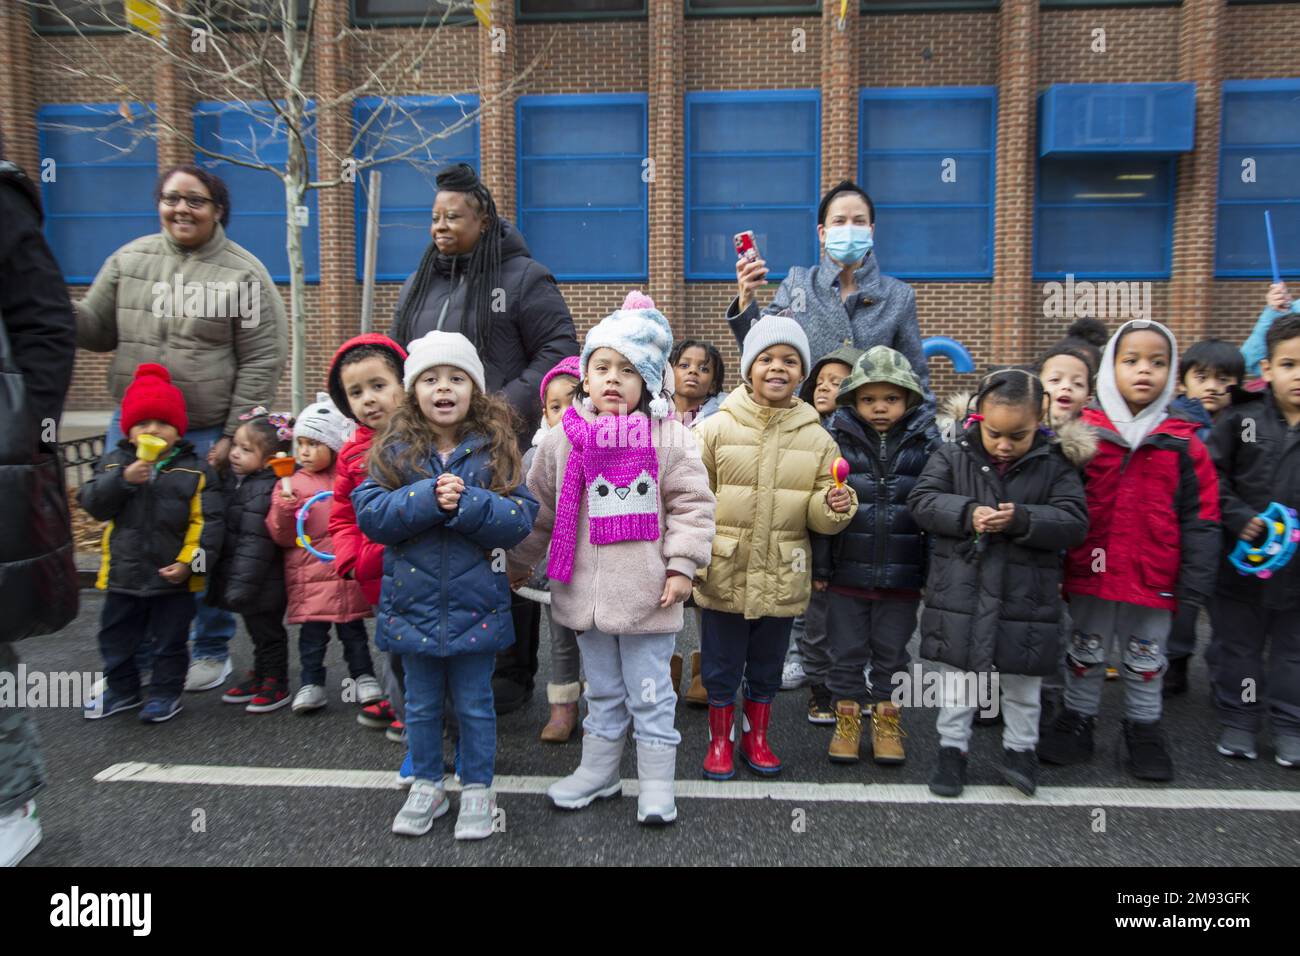 Local school children watch the  2023 Three Kings Day Parade along 3rd Avenue in Spanish Harlem, hosted by El Museo del Barrio, New York’s leading Latino cultural institution. One of the El Museo del Barrio large artistic puppets that lead the parade each year. Stock Photo